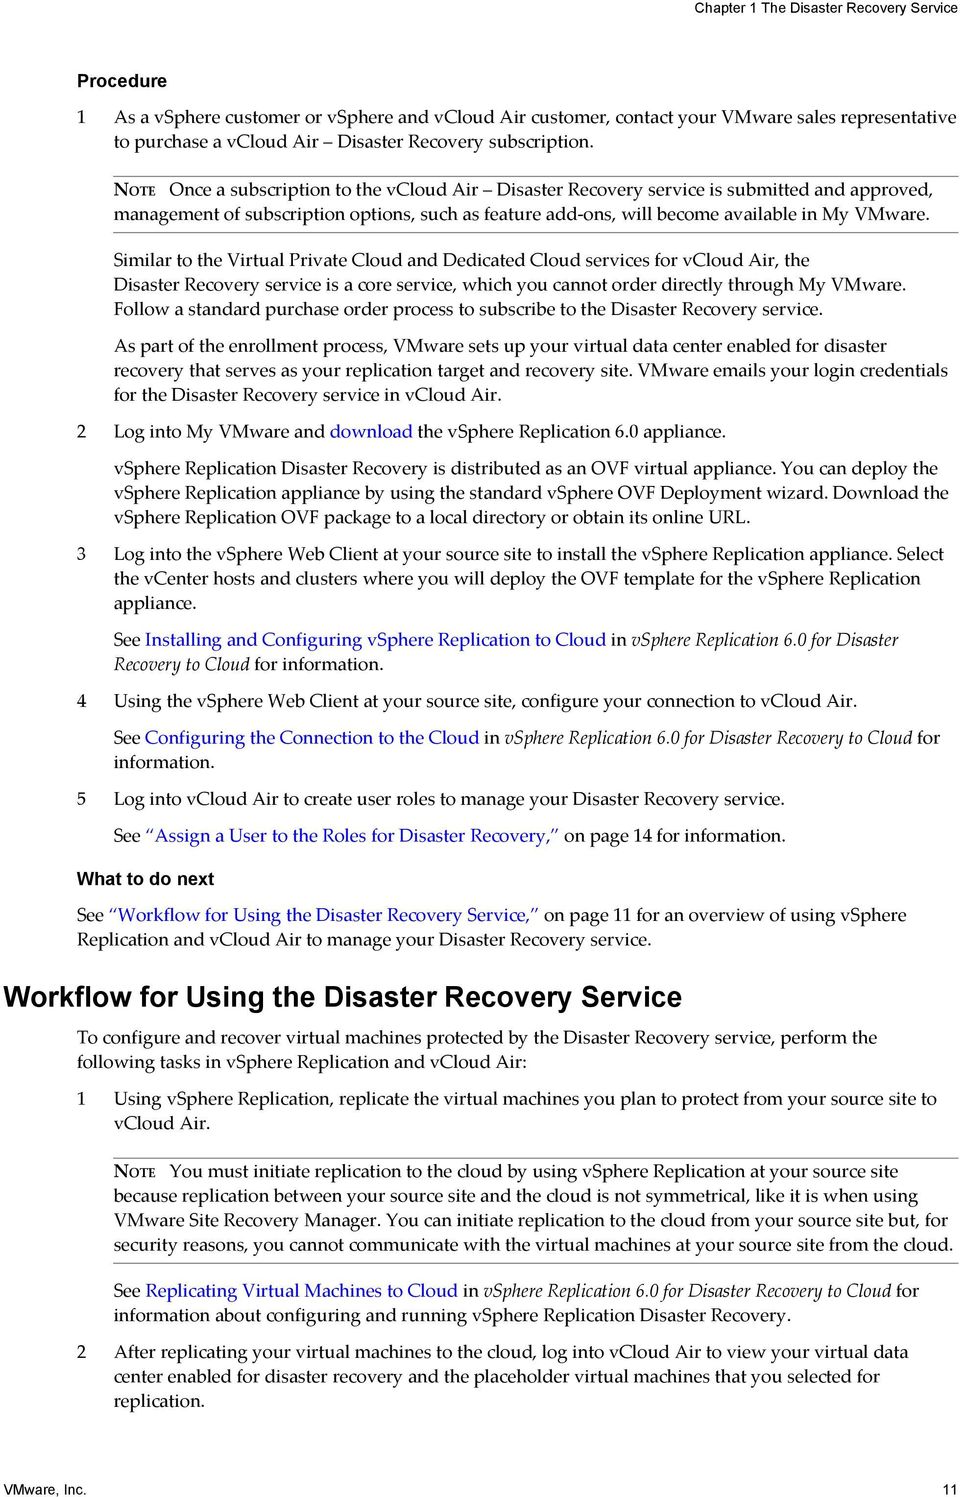 NOTE Once a subscription to the vcloud Air Disaster Recovery service is submitted and approved, management of subscription options, such as feature add-ons, will become available in My VMware.